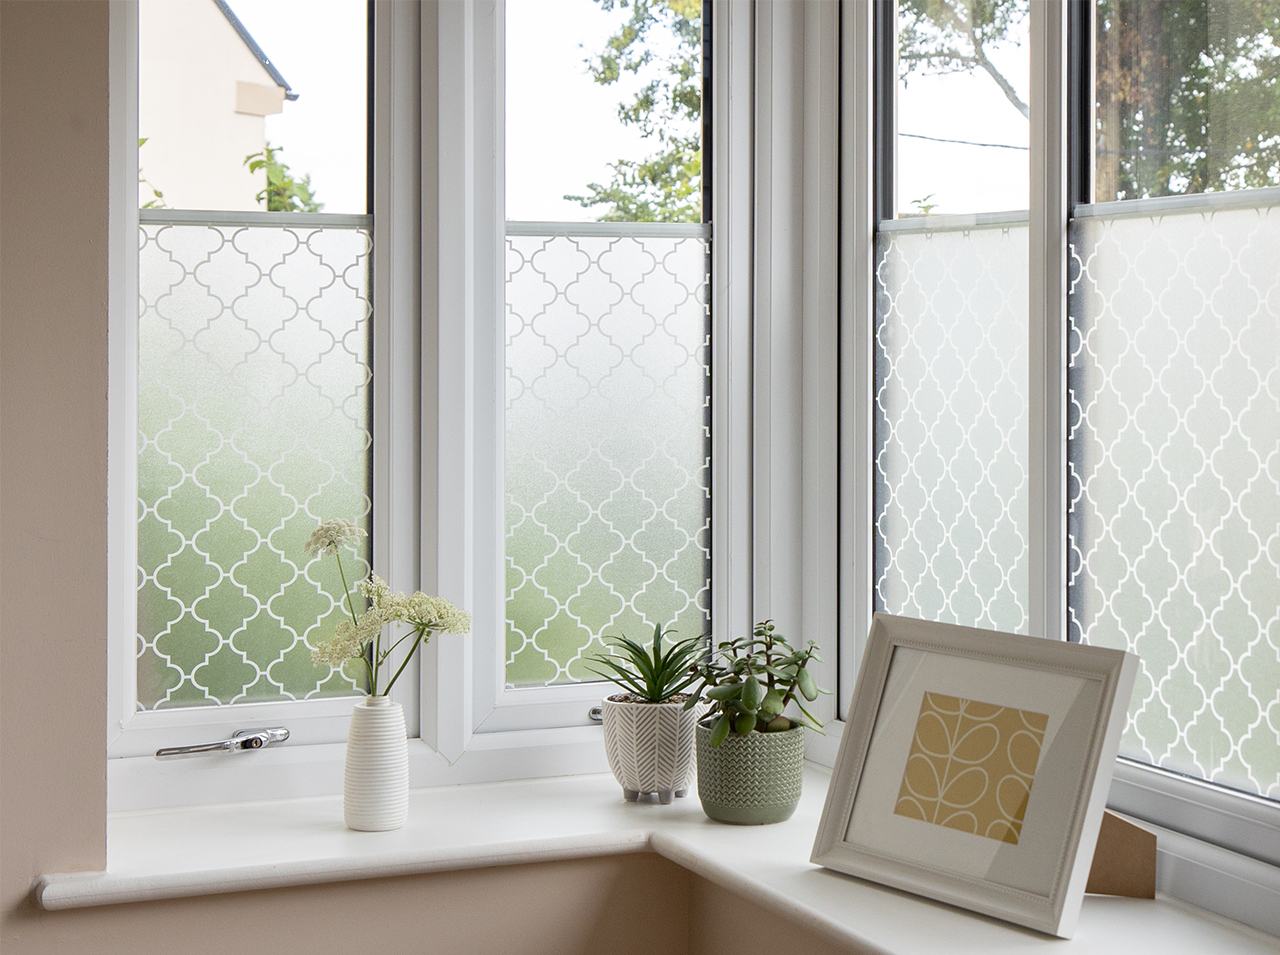 Window covered with milky opaque window foil with oriental outline pattern in white